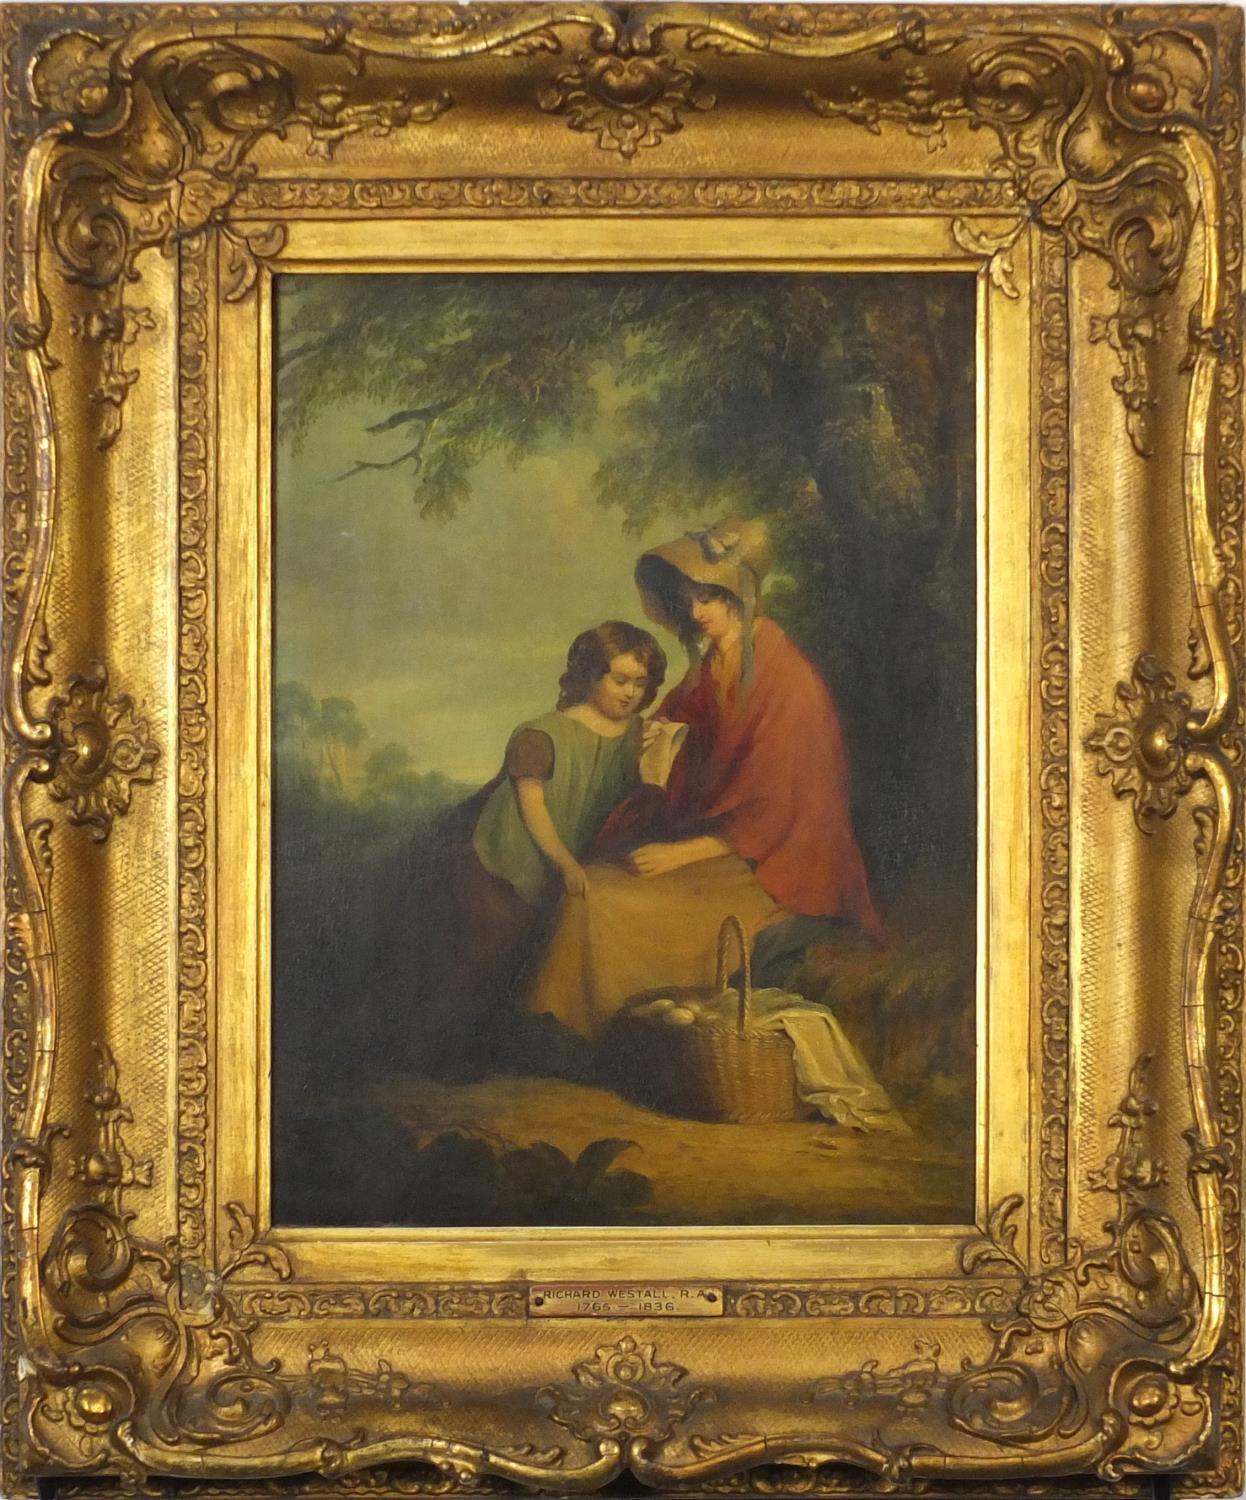 Attributed to Richard Westall RA - Mother and child in a landscape, 19th century oil on canvas, - Image 2 of 4